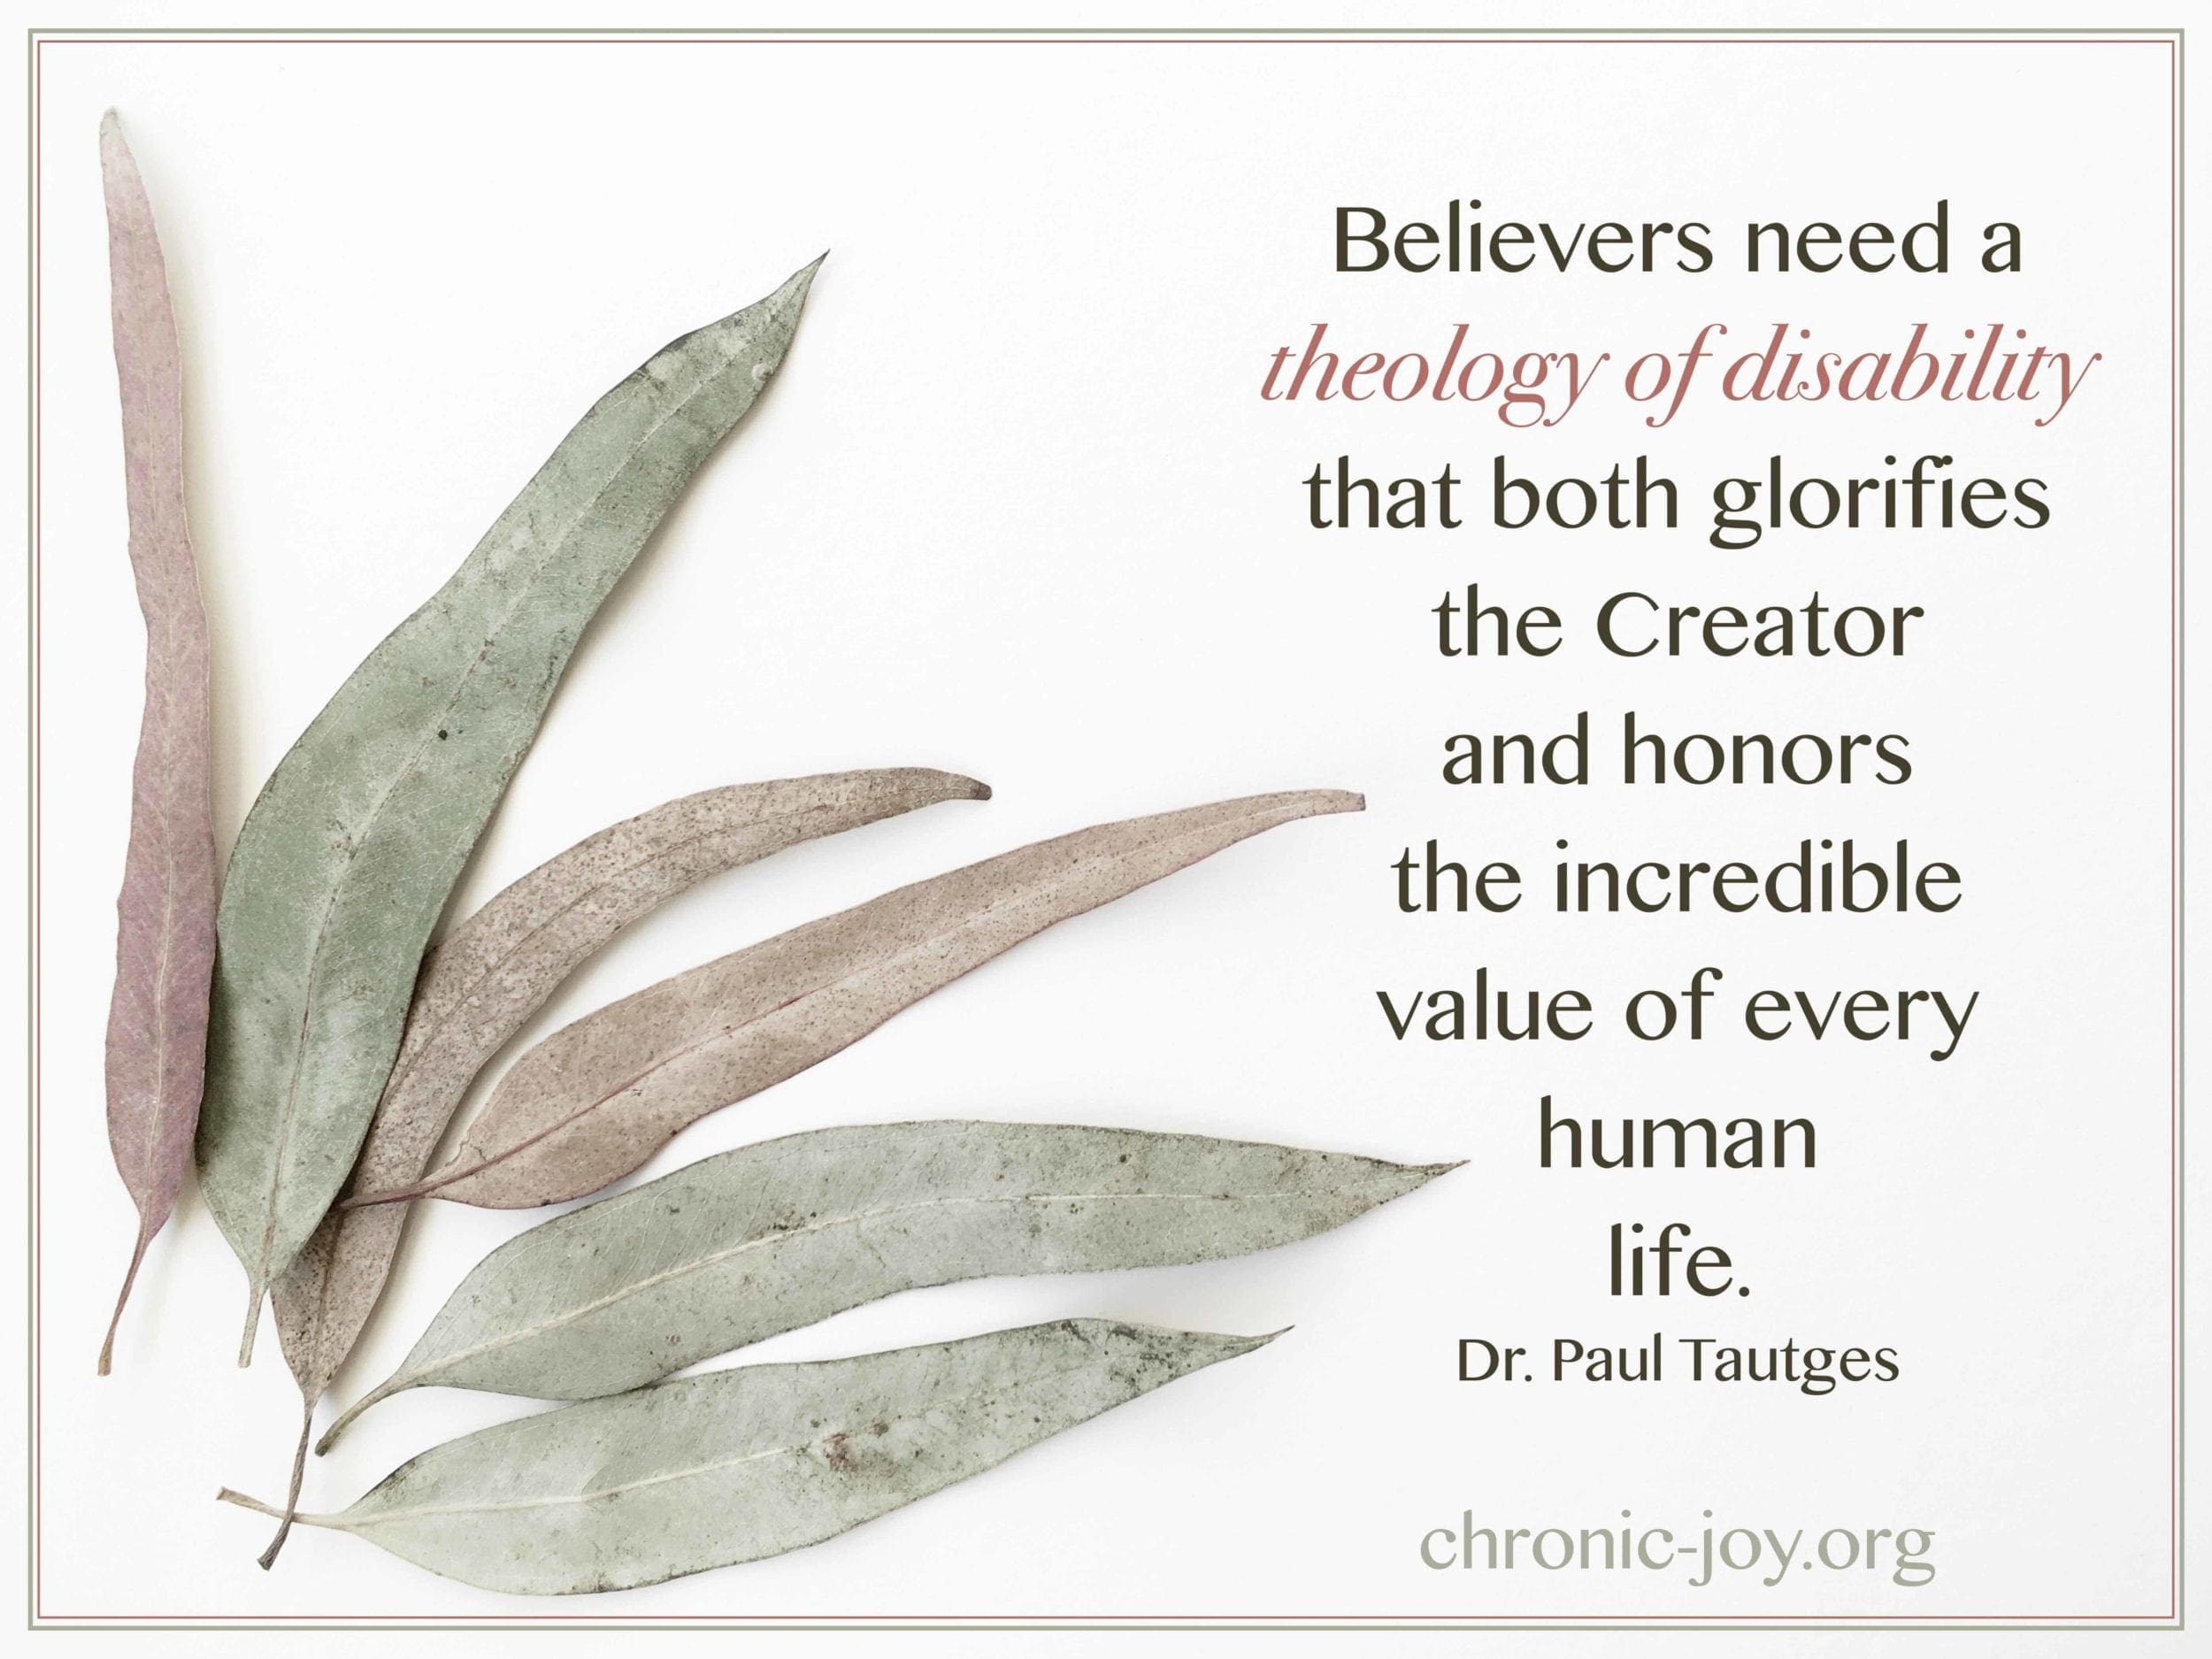 "Believers need a theology of disability that both glorifies the Creator and honors the incredible value of every human life." Dr. Paul Tautges